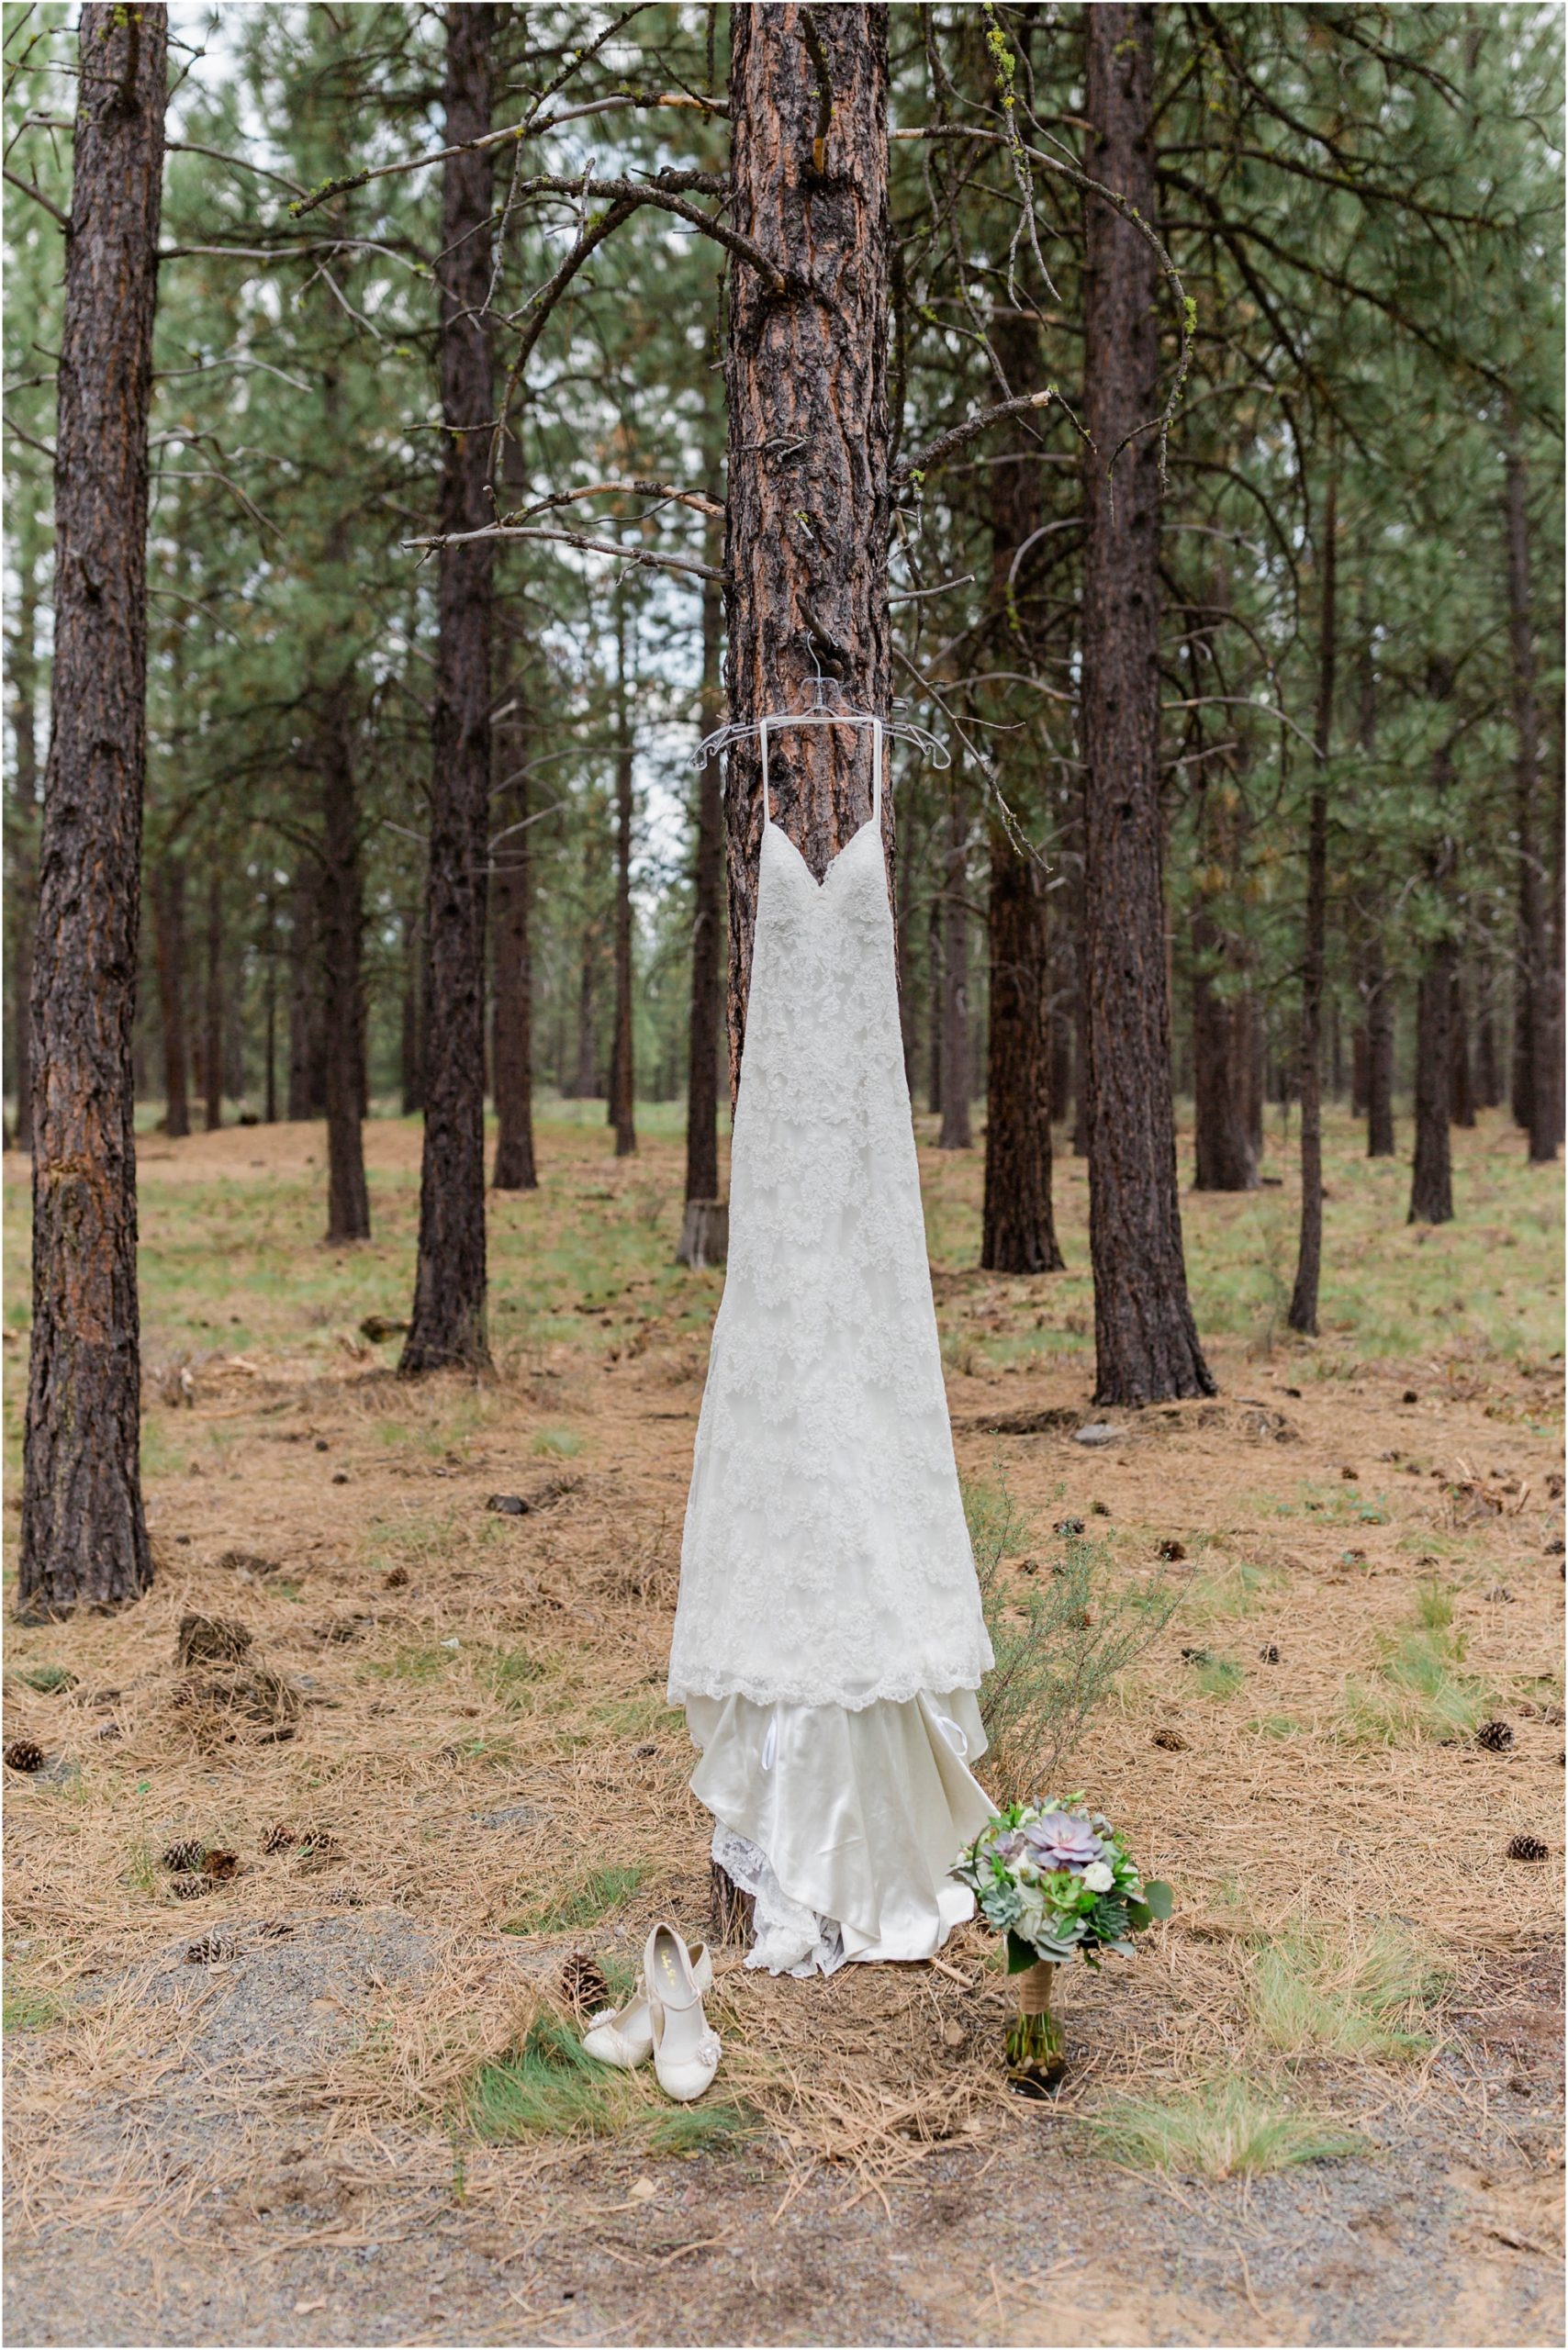 A gorgeous BHLDN wedding gown hangs from a tall pine tree at the High Desert Museum in Bend, OR. | Erica Swantek Photography